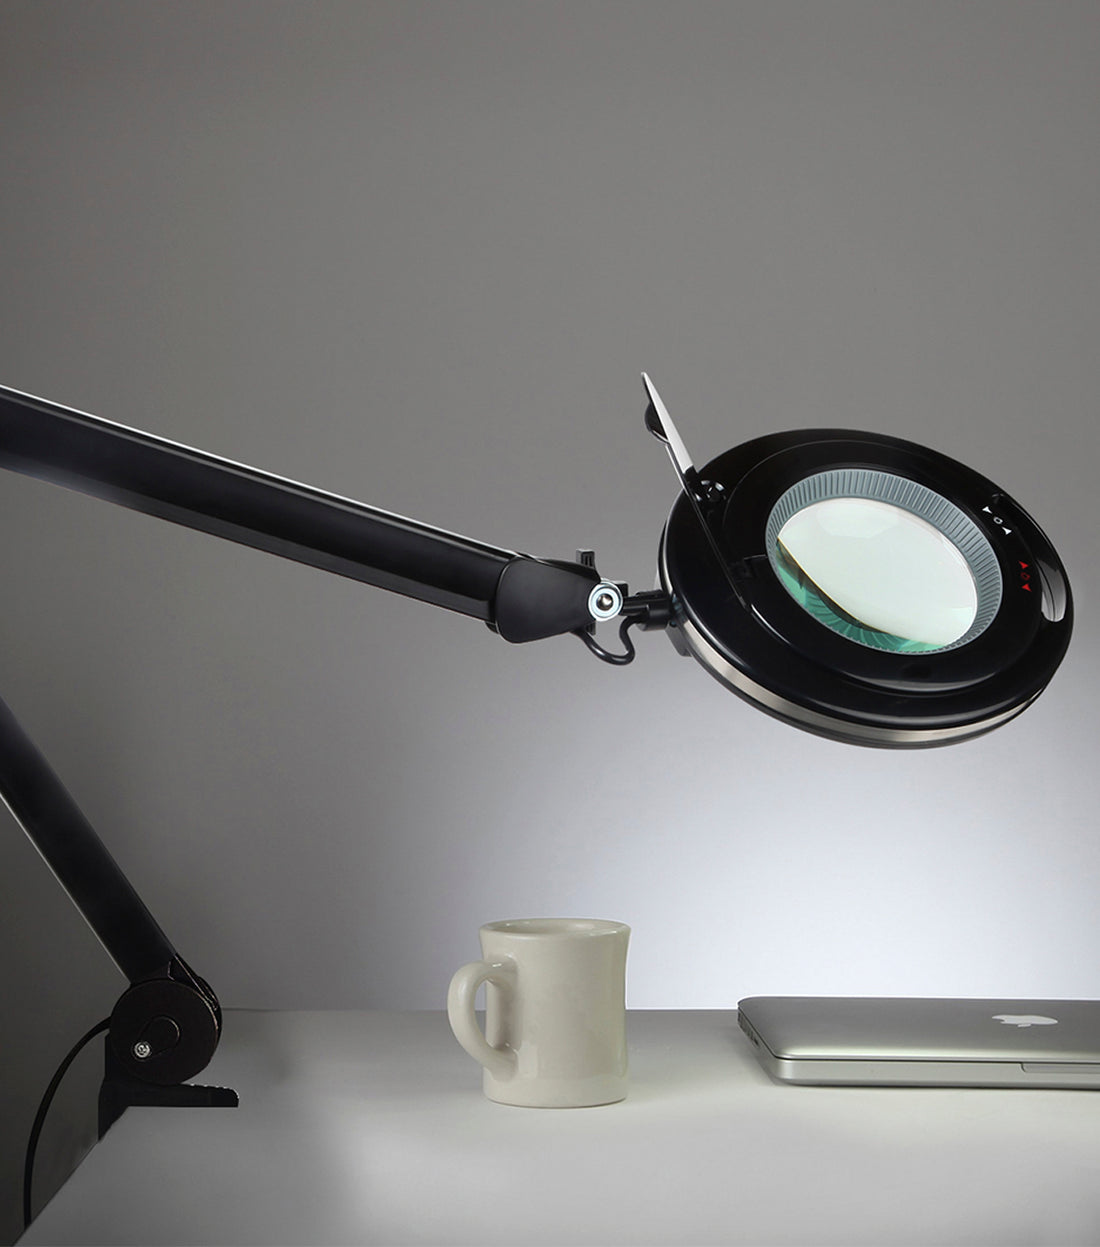 LED Magnifier Lamp W/ Table Clamp